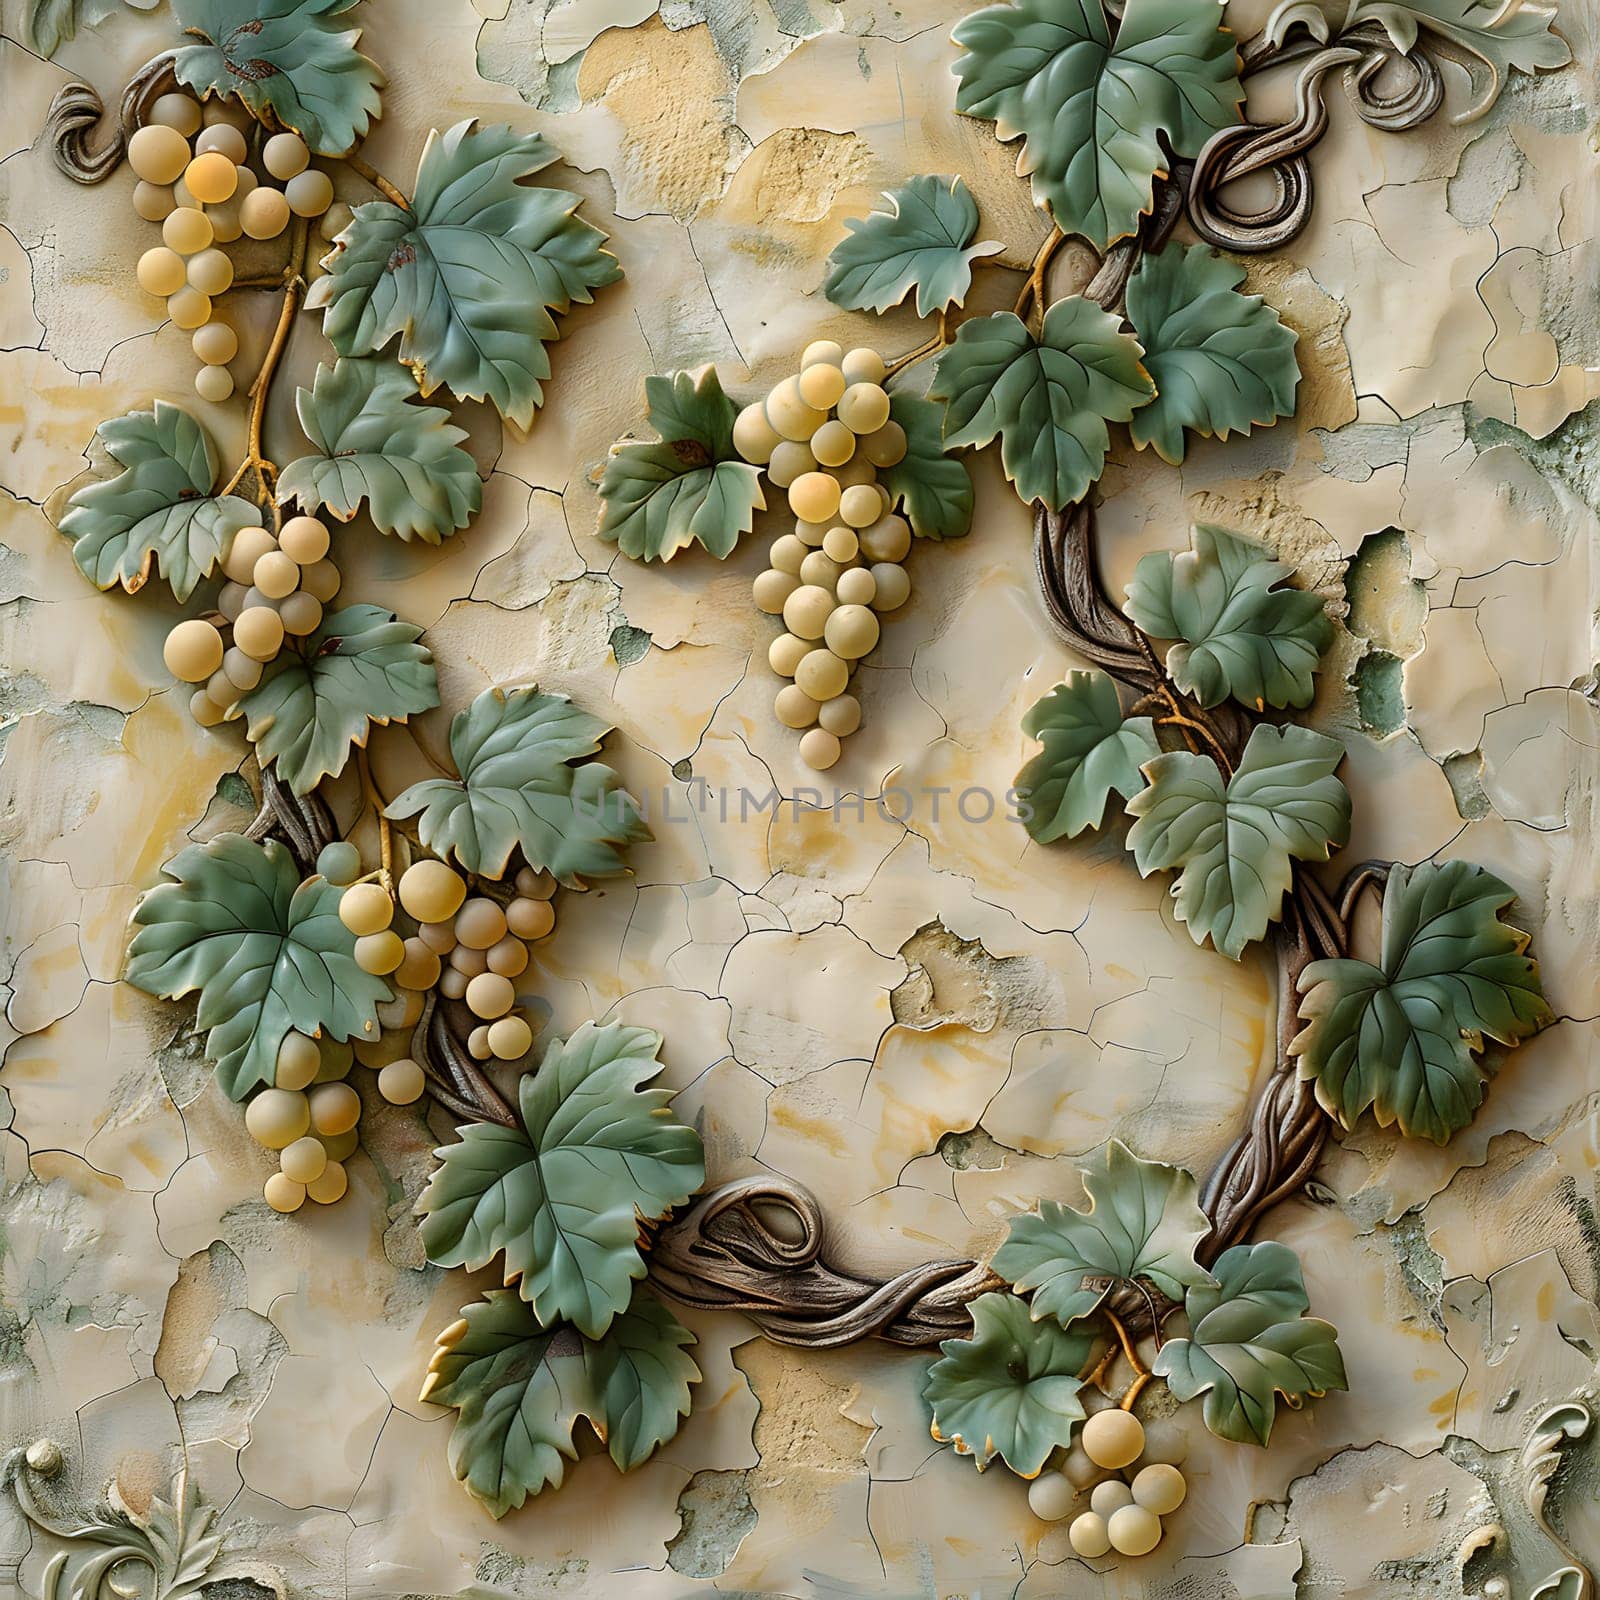 A plantinspired pattern of grapes and leaves beautifully painted on the wall serves as a natural material art piece, resembling a fashionable accessory or serveware design